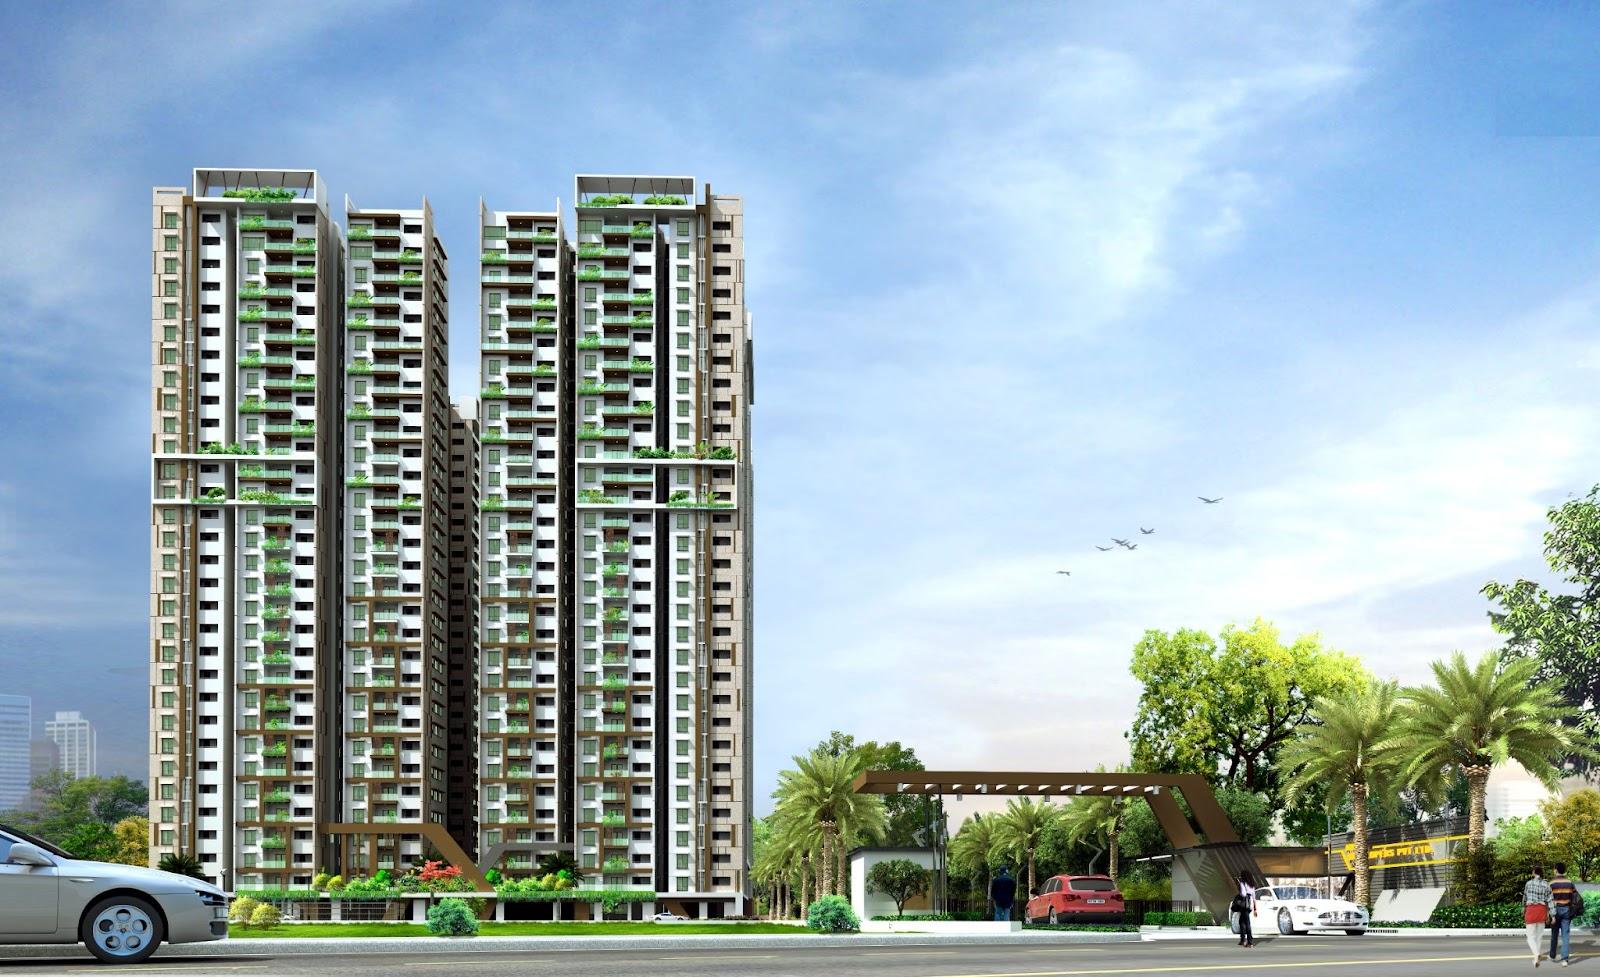 Arsis Green Hills by Arsis developers are the best option for 2 BHK flats and 3 BHK flats in KR Puram.
